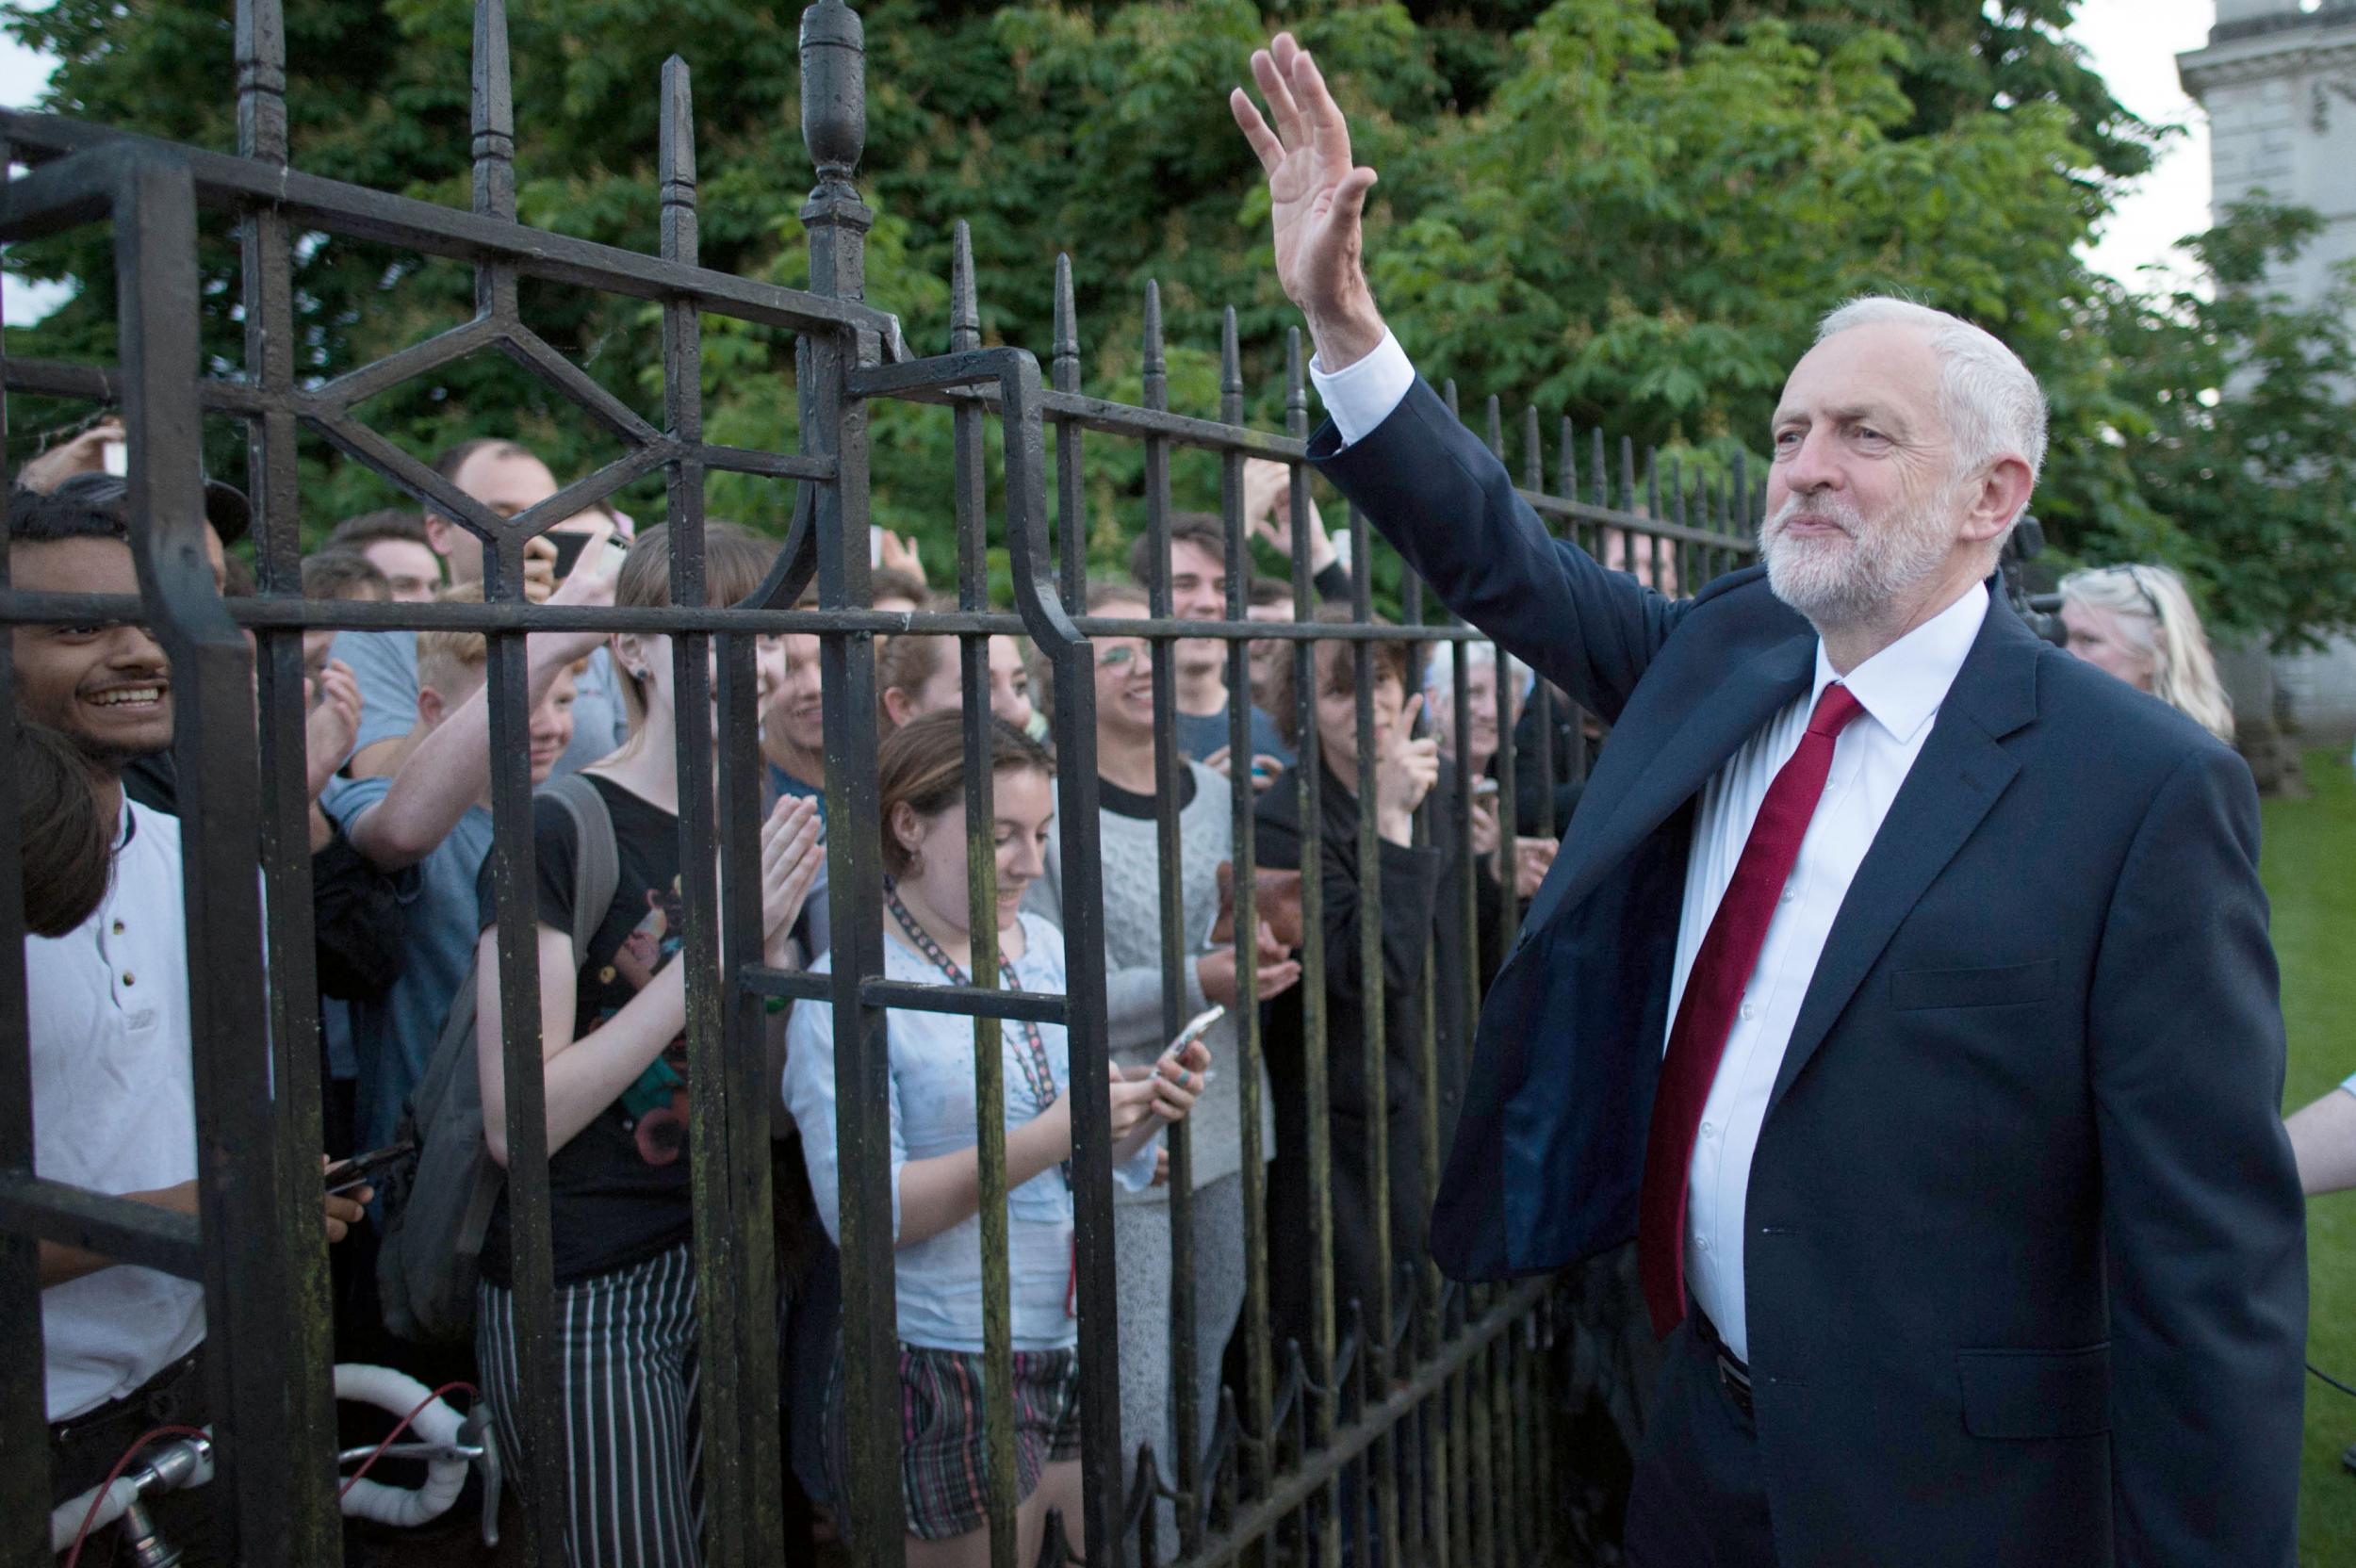 Labour leader Jeremy Corbyn could receive an unexpected late boost in the polls from disaffected Ukip voters